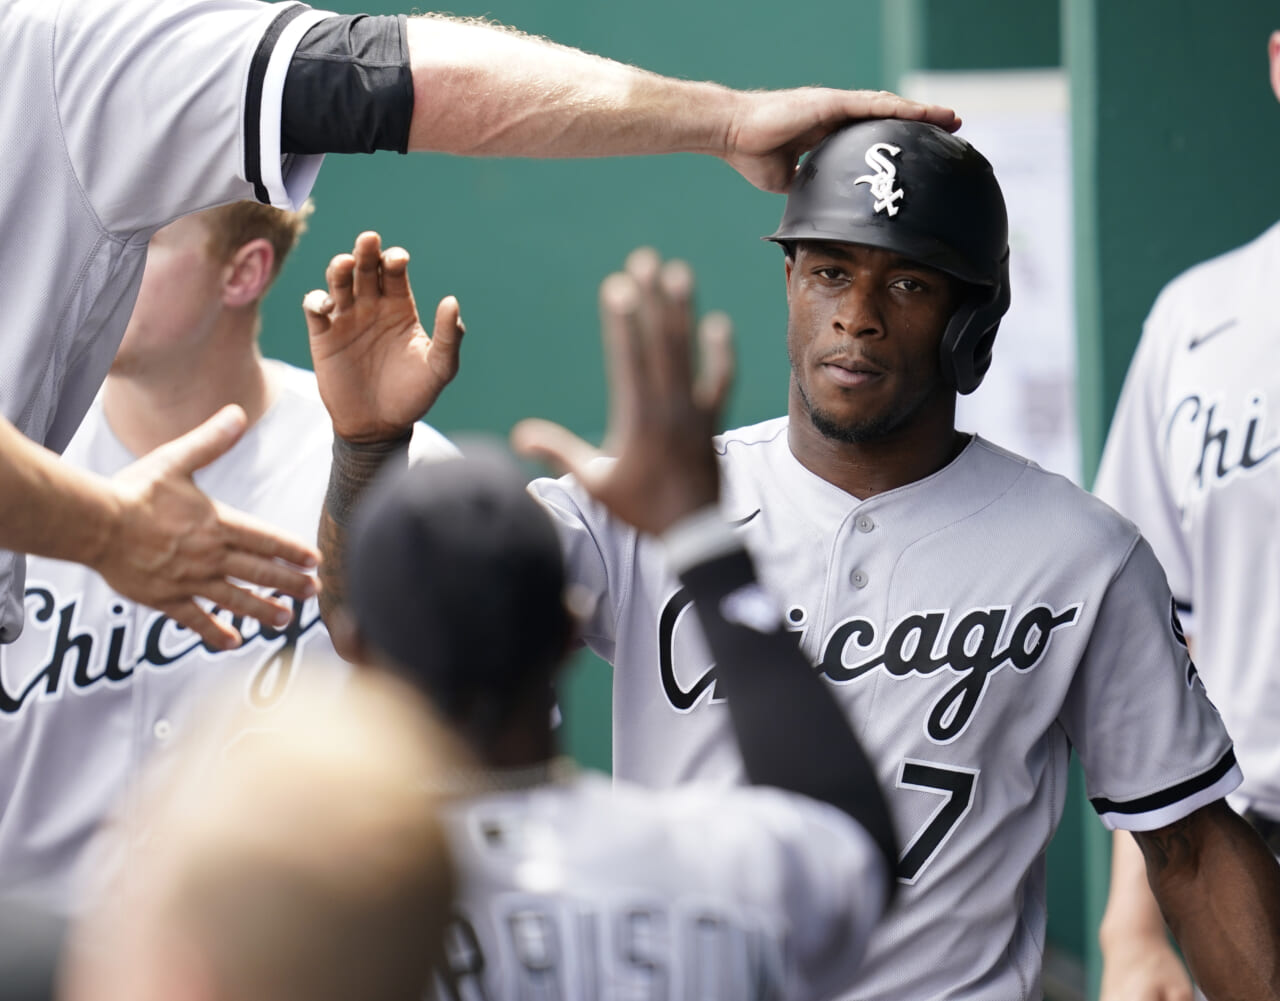 White Sox' Tim Anderson accuses Yankees' Josh Donaldson of racist